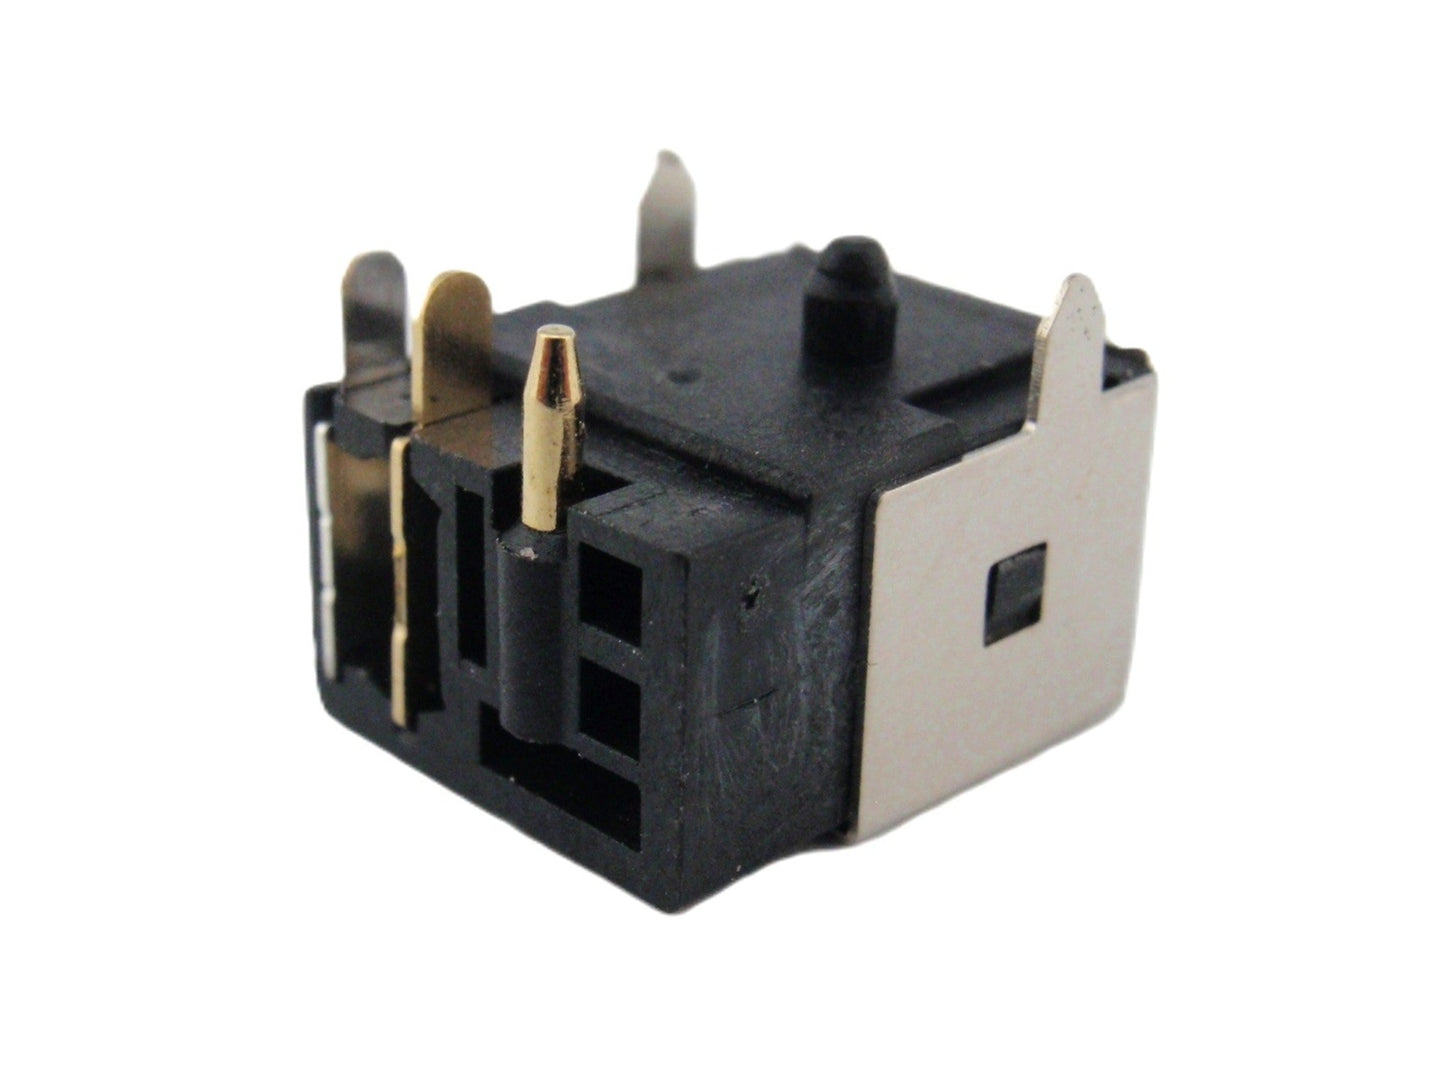 ASUS DC In Power Jack Charging Connector B33E N45 N45S N45SF U31 U31F U31J U31JC U31SD U31SG U33JC U35 X35 X35JC X35JG X35JF X35F X35S X35SD X35SG